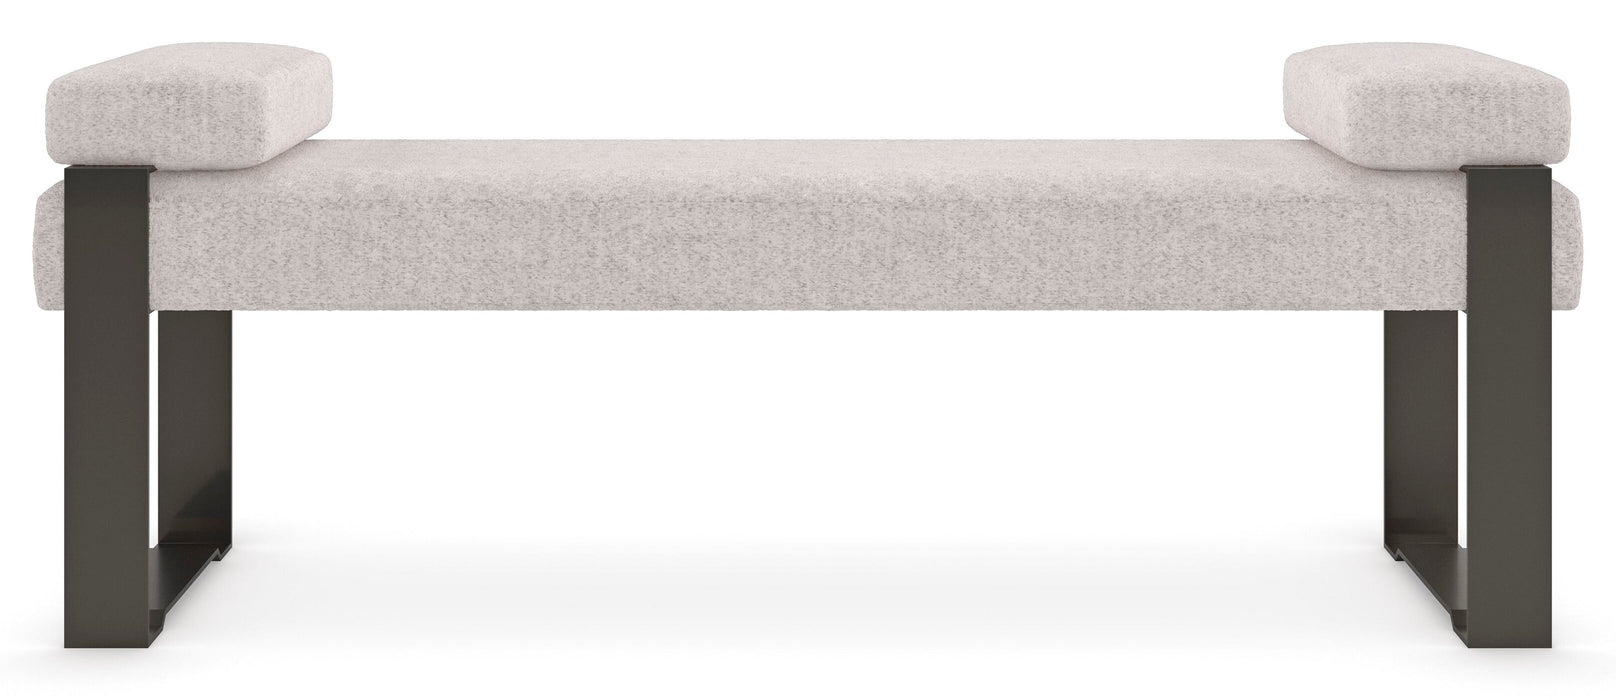 Caracole Classic Lasting Impression Bench